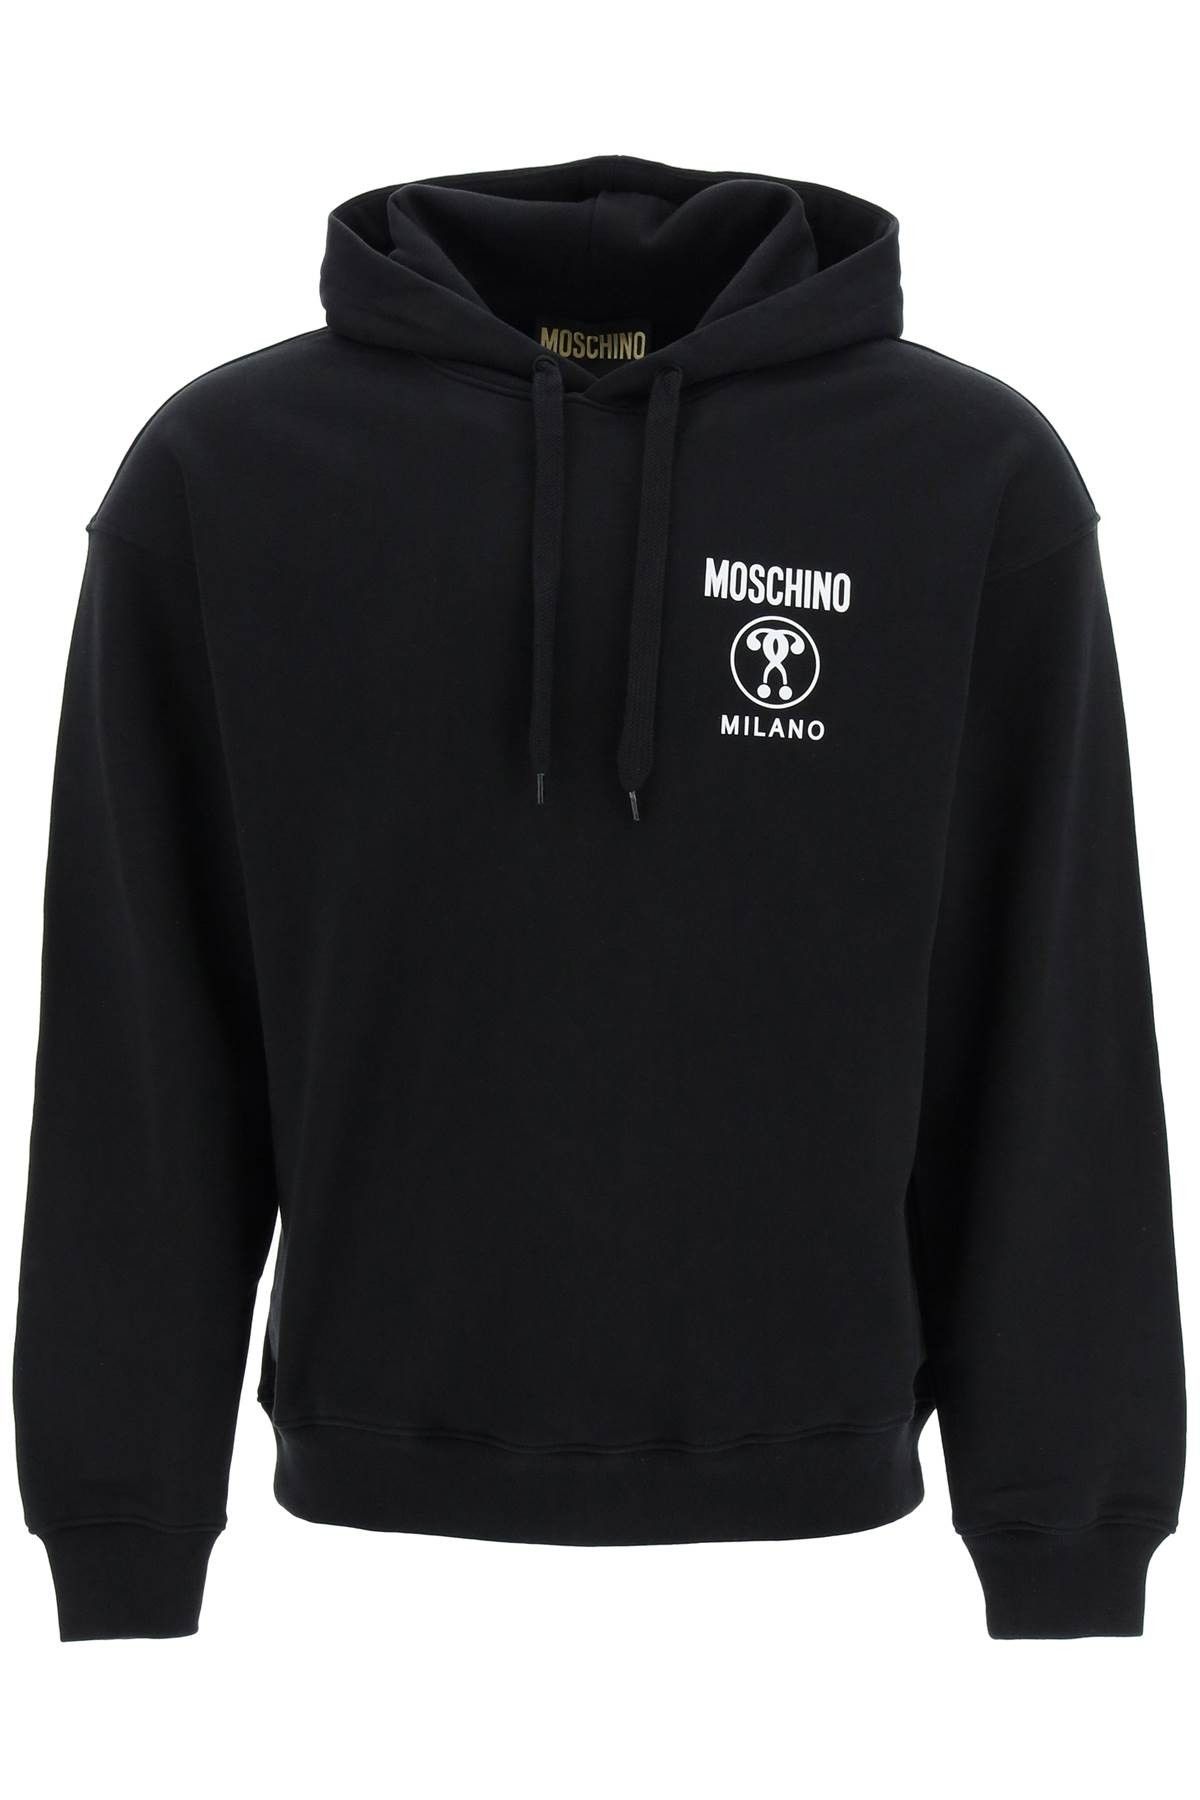 orders prices Moschino ´double question mark´ hoodie Size EU 48 ...